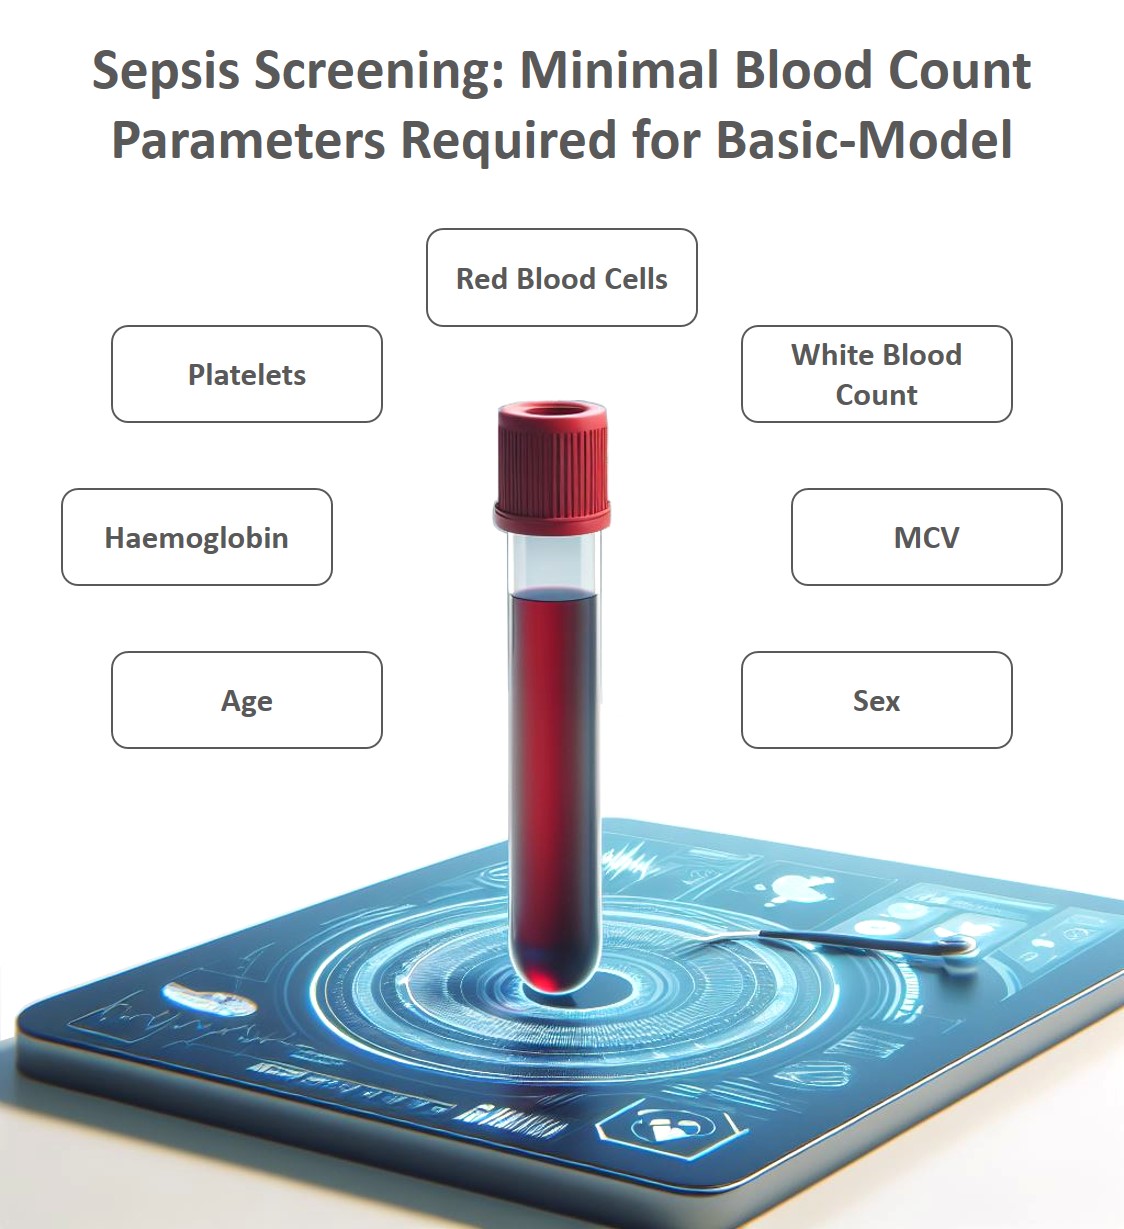 Presentation of the data required for the basic model for early sepsis detection